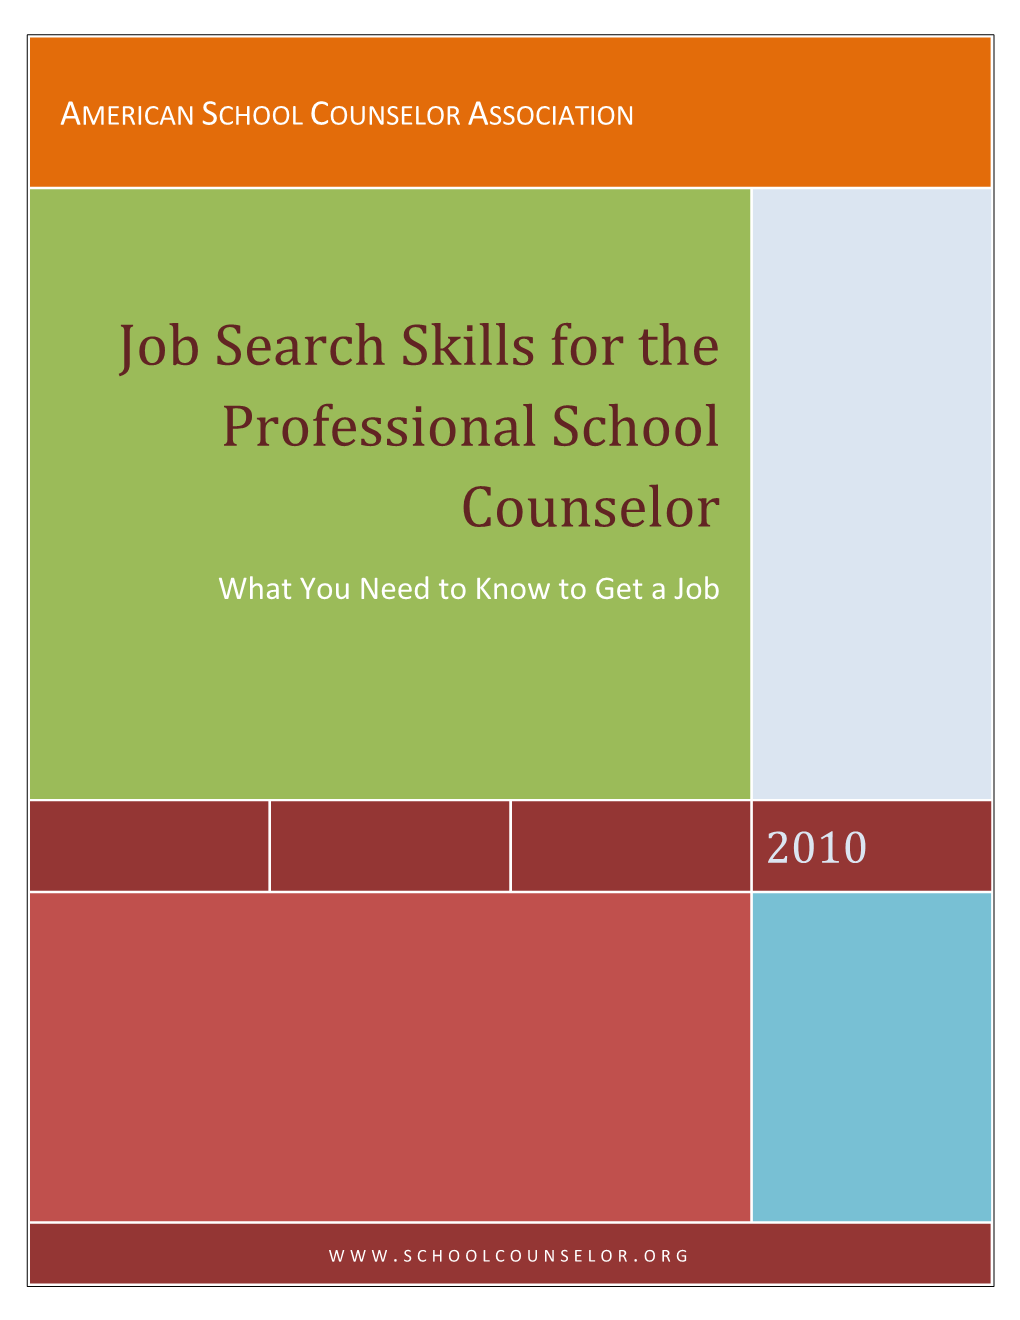 Job Search Skills for the Professional School Counselor